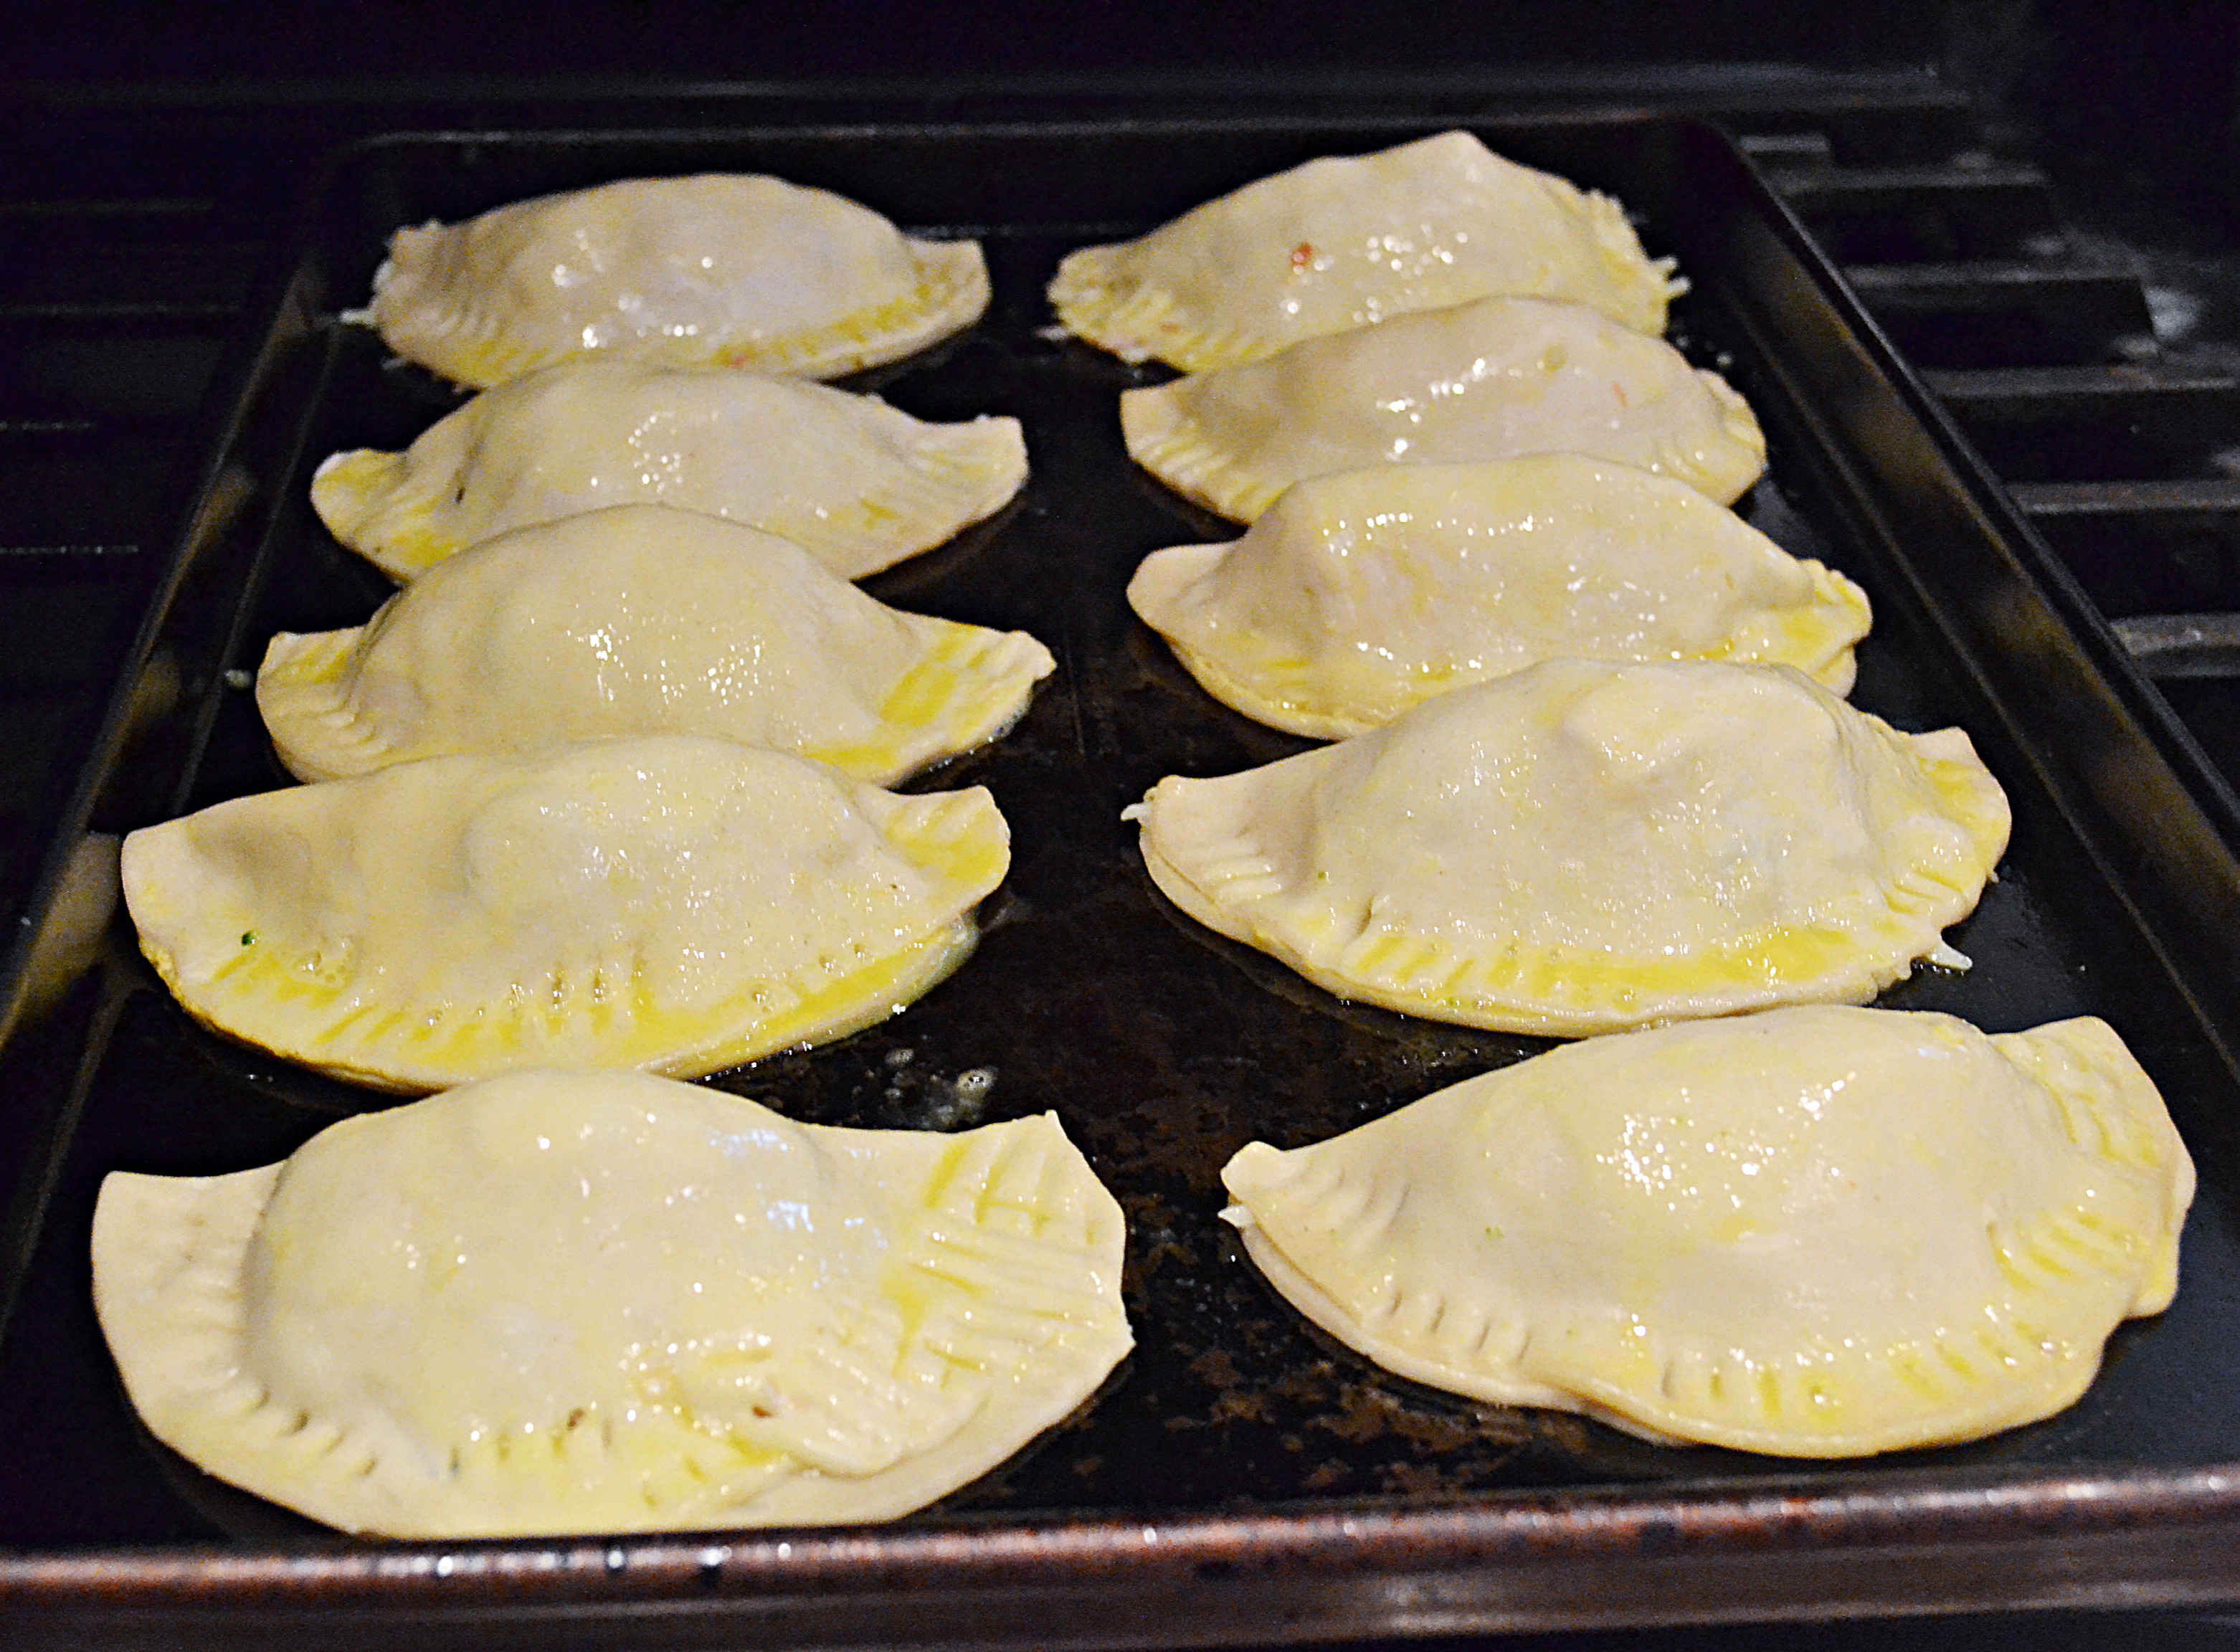 Baked Turkey and Cheese Empanadas - in the oven